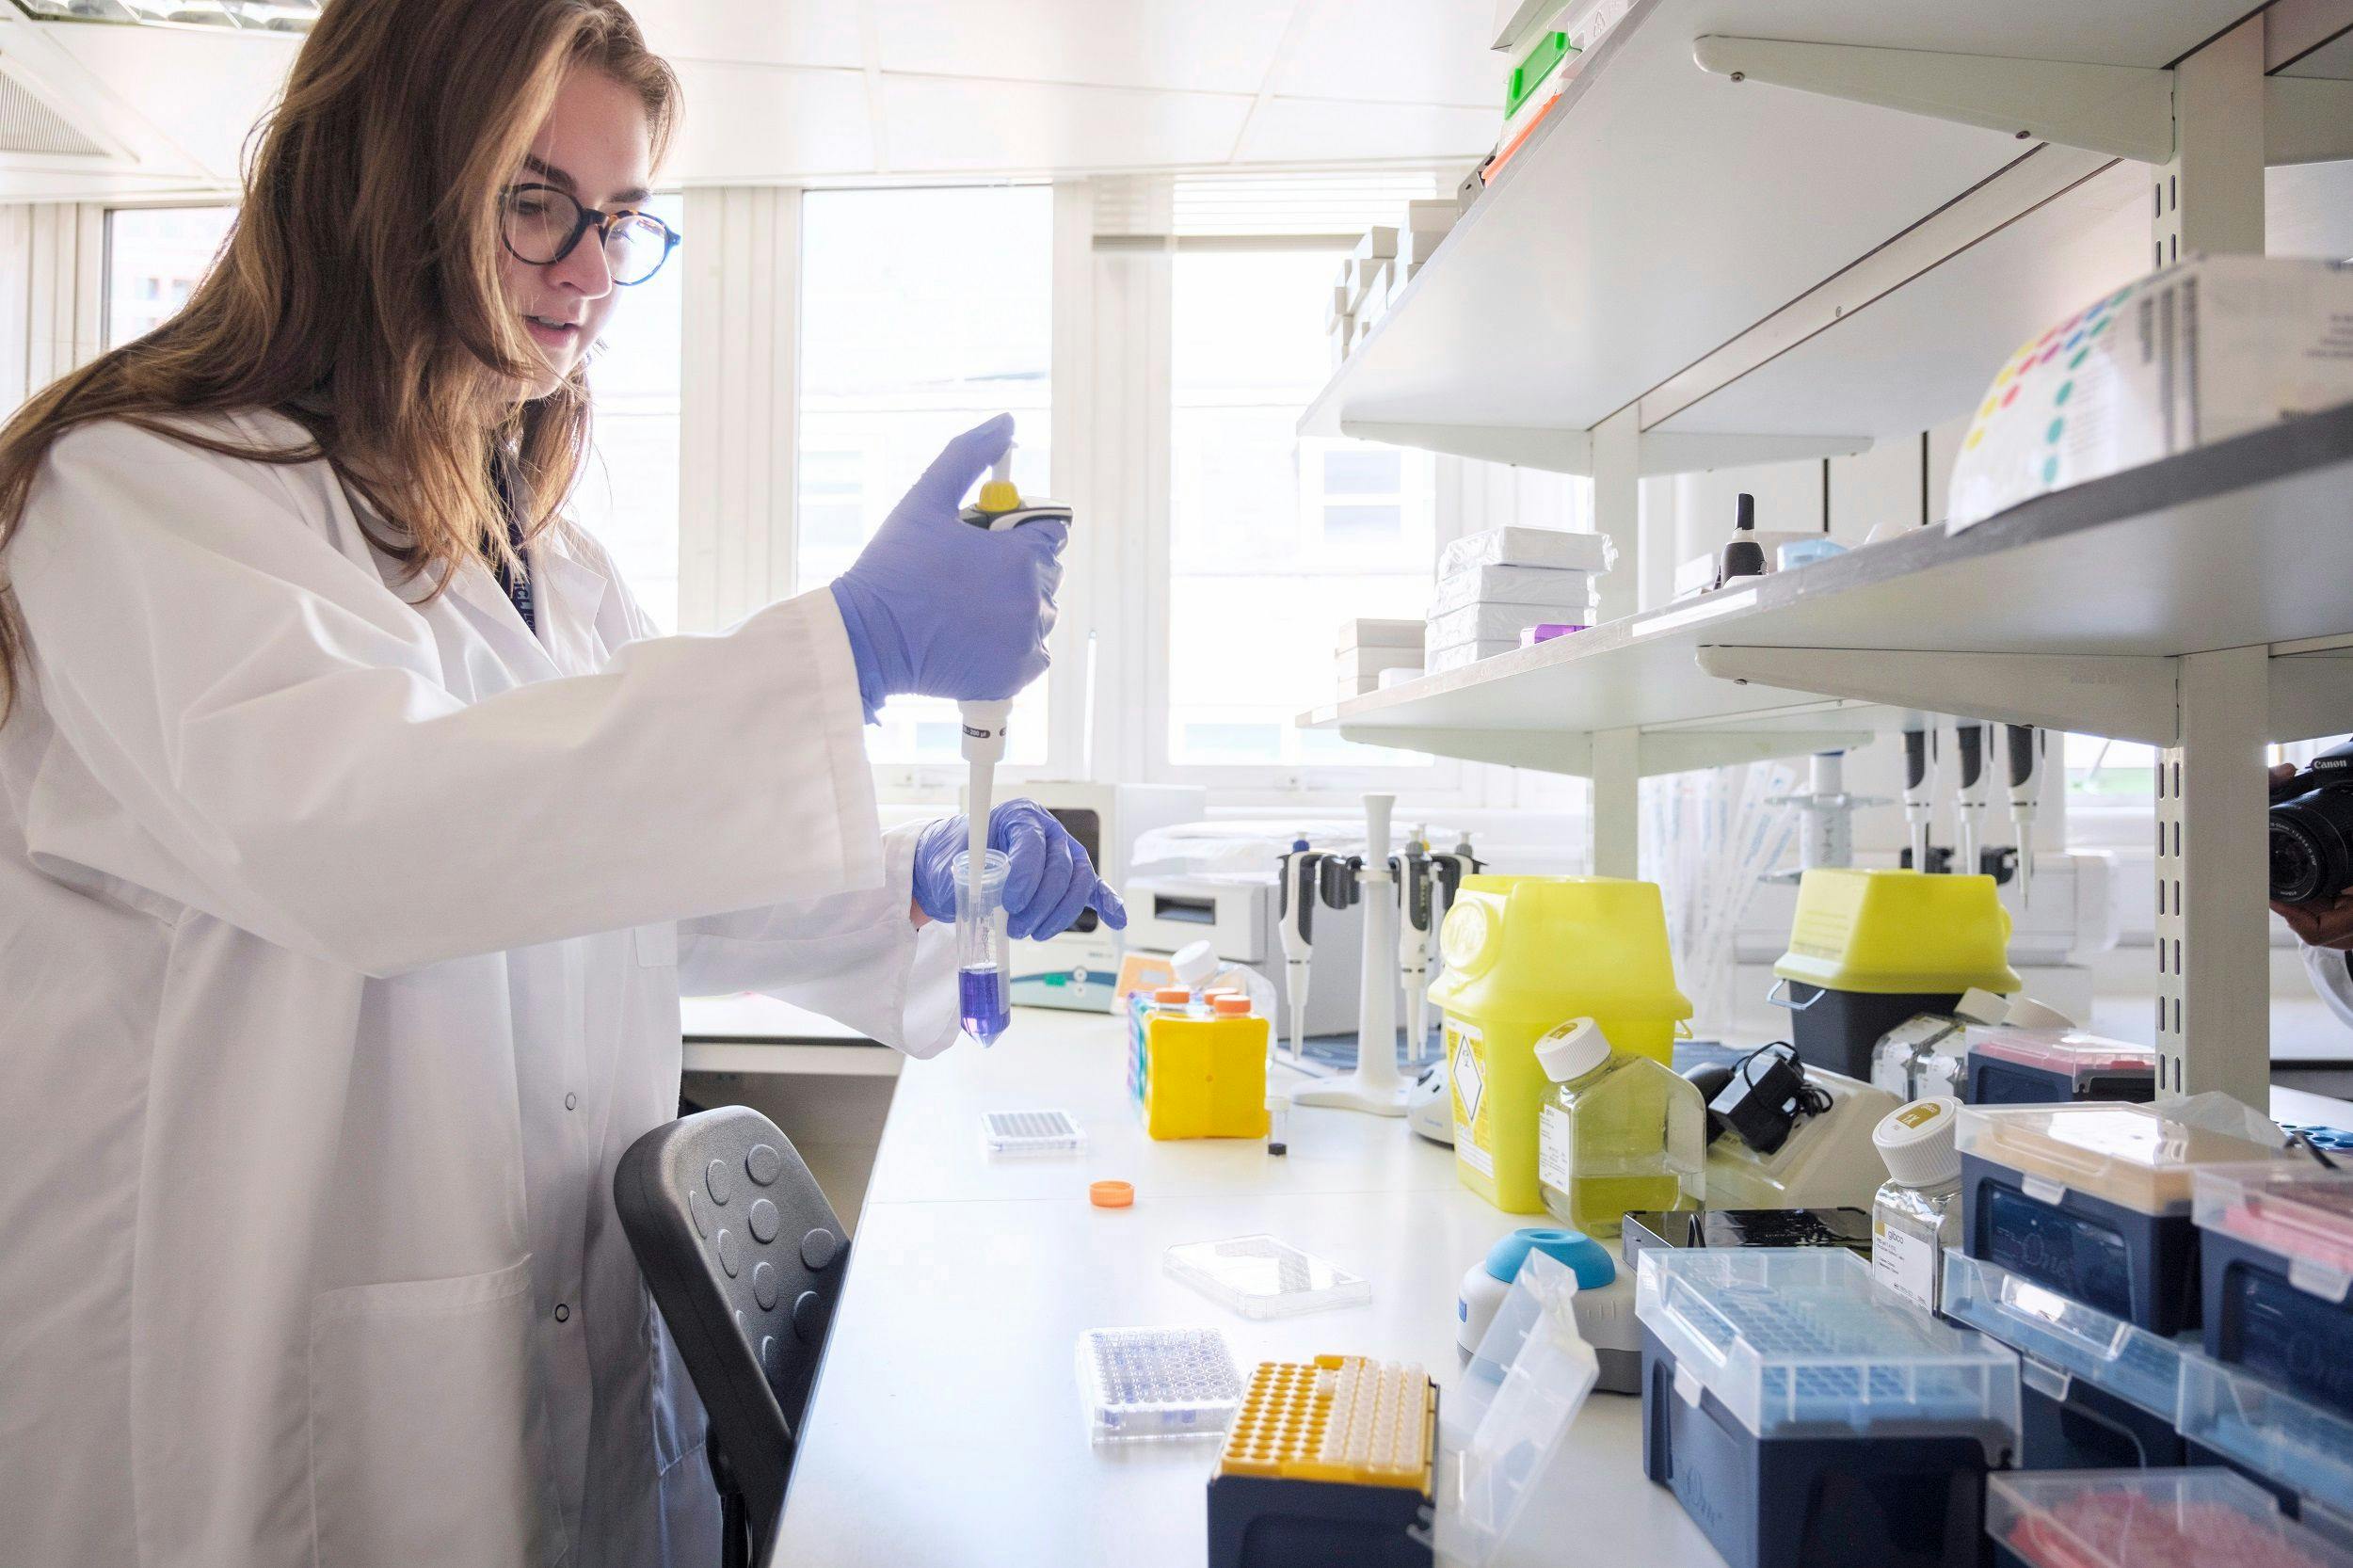 A researcher in a white coat performs work in a lab. Image courtesy Moorfields Eye Charity.